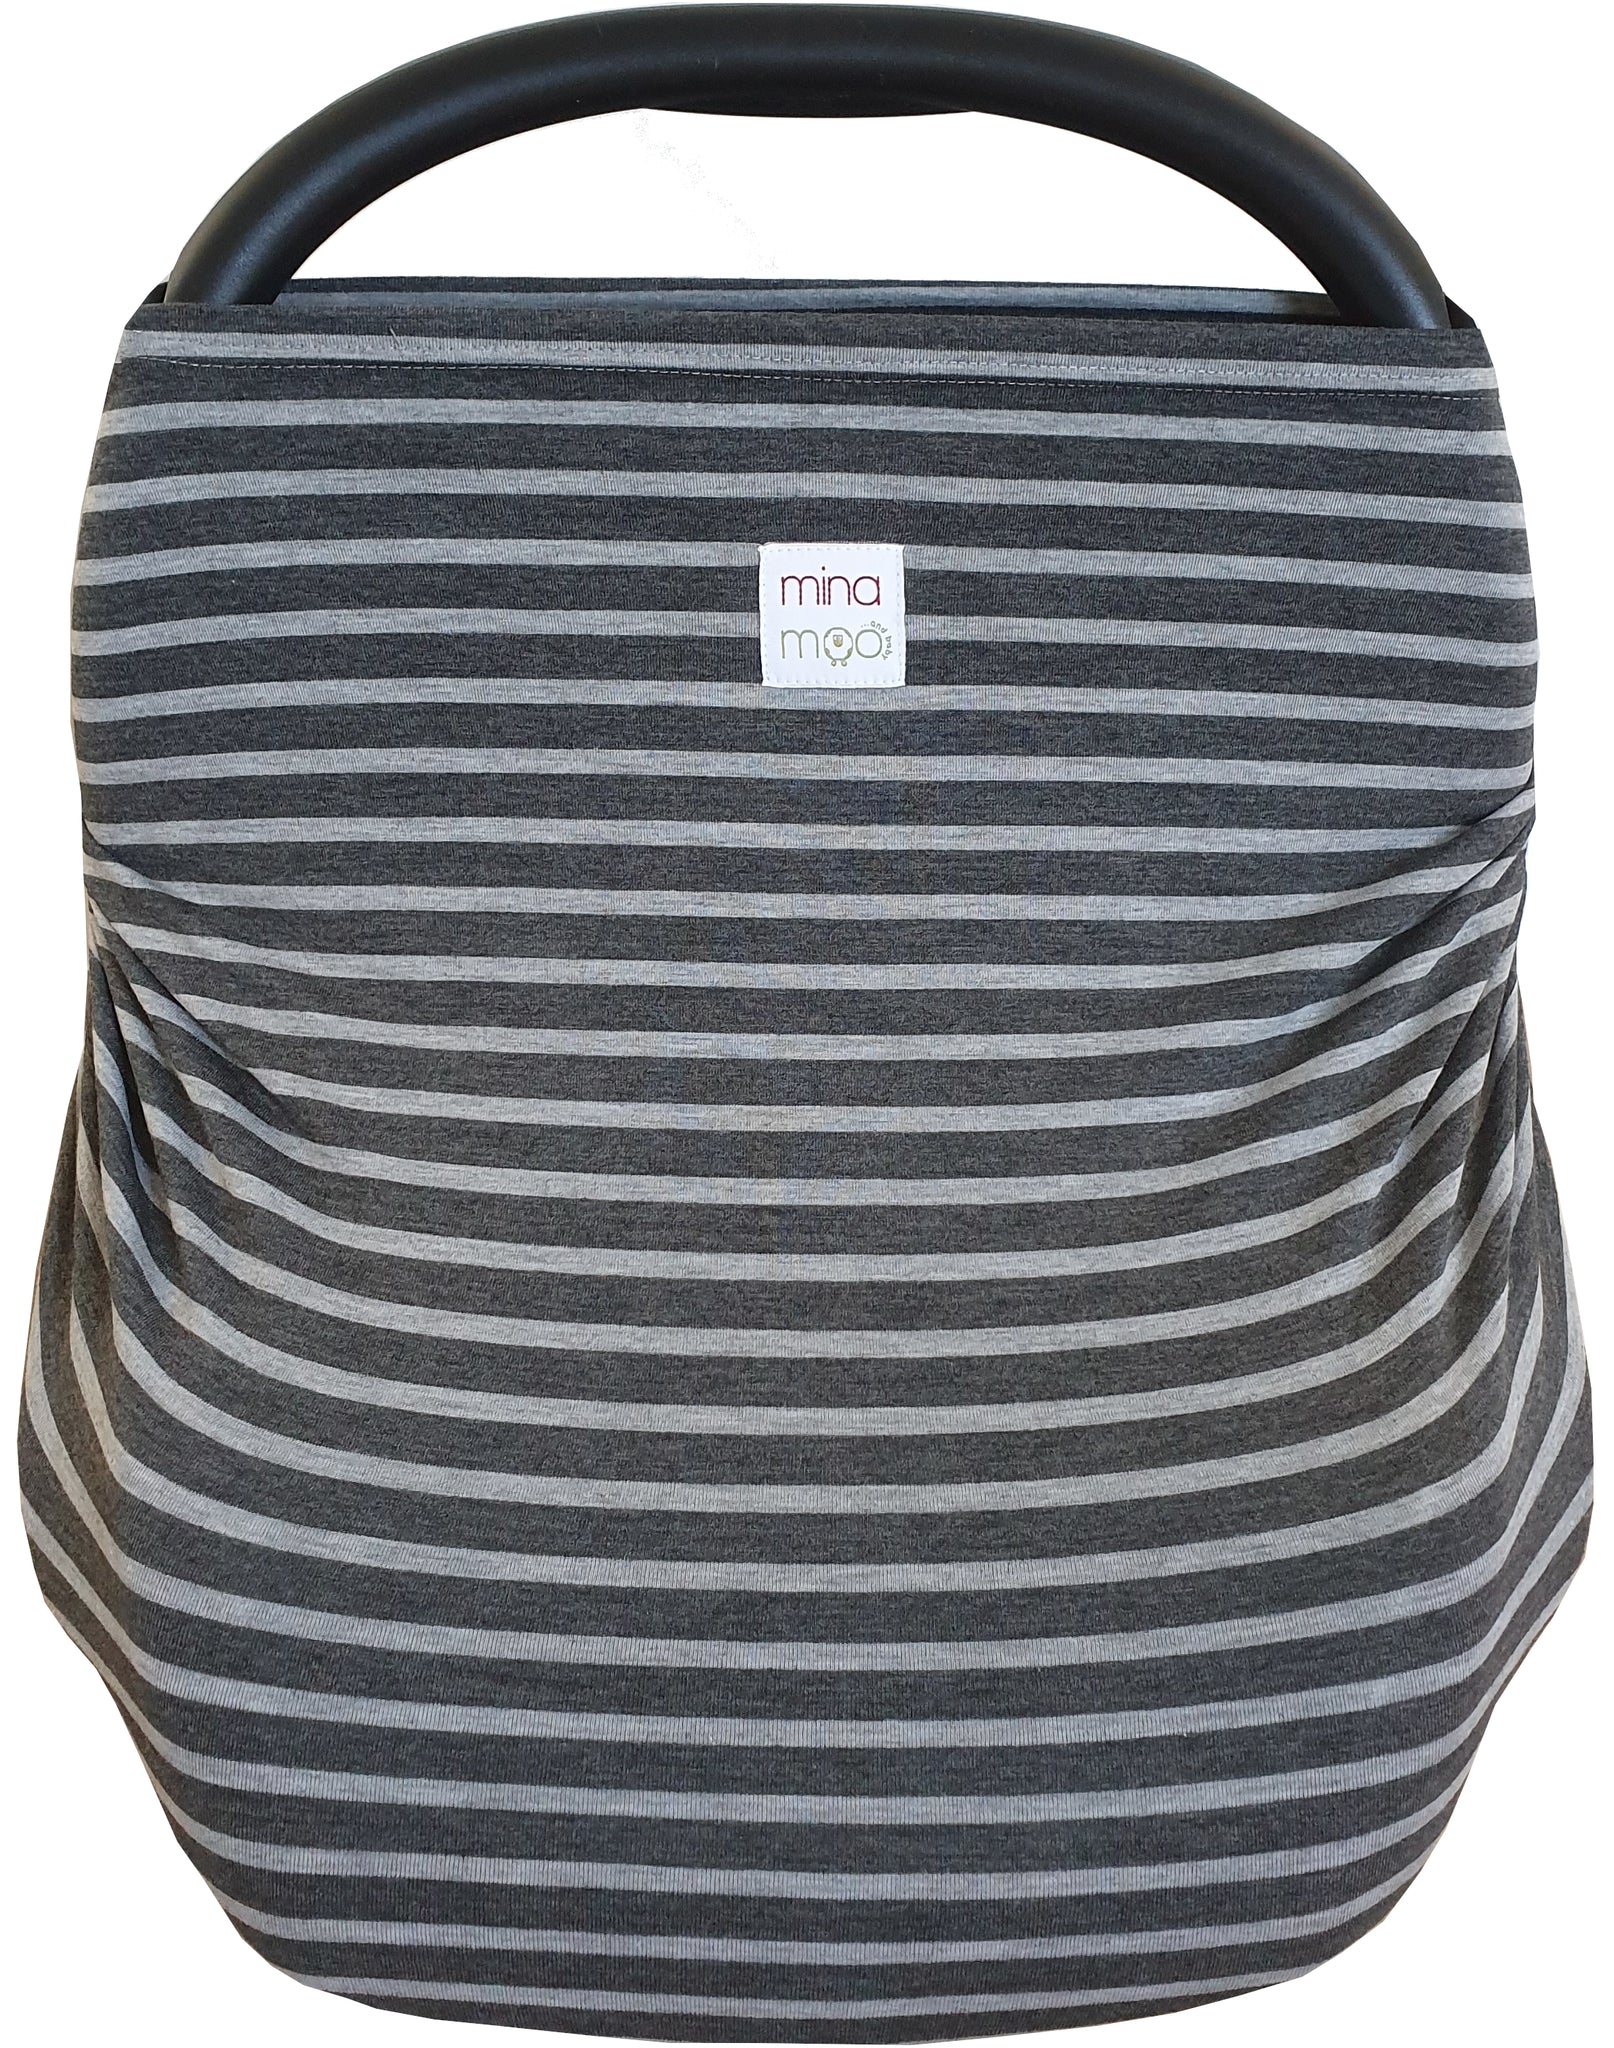 Charcoal melange stripe fitted infant car seat cover